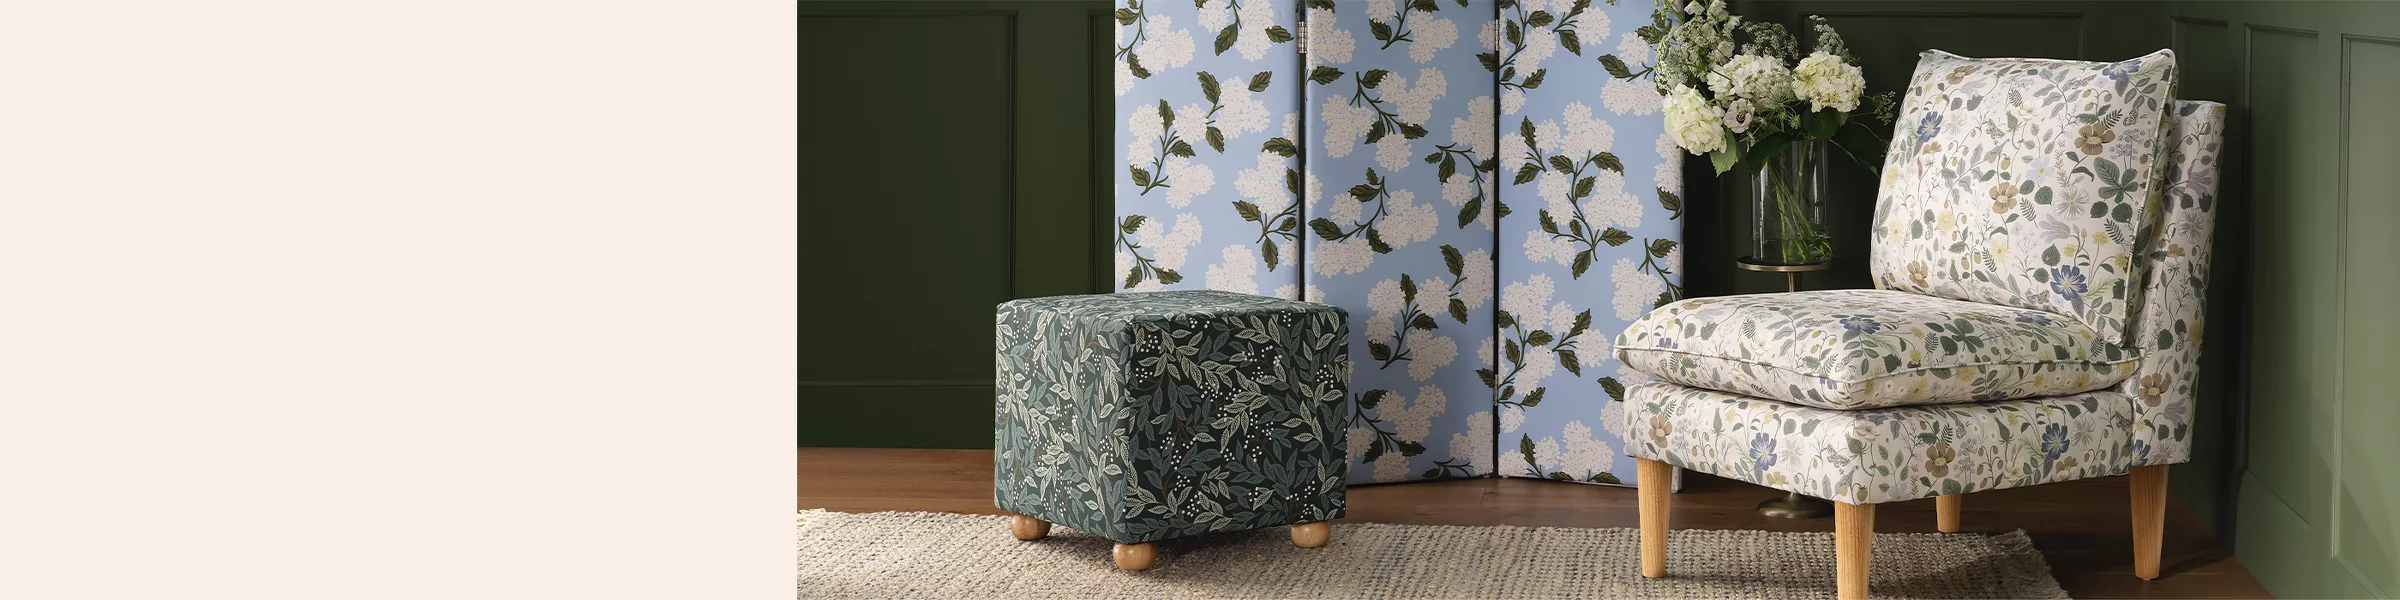 In the corner of a room with deep green walls there’s a white floral accent chair. A light blue room divider with 3 sections & a white hydrangea print stands in front of a wall. There’s a dark green & black ottoman nearby with a leafy design.  